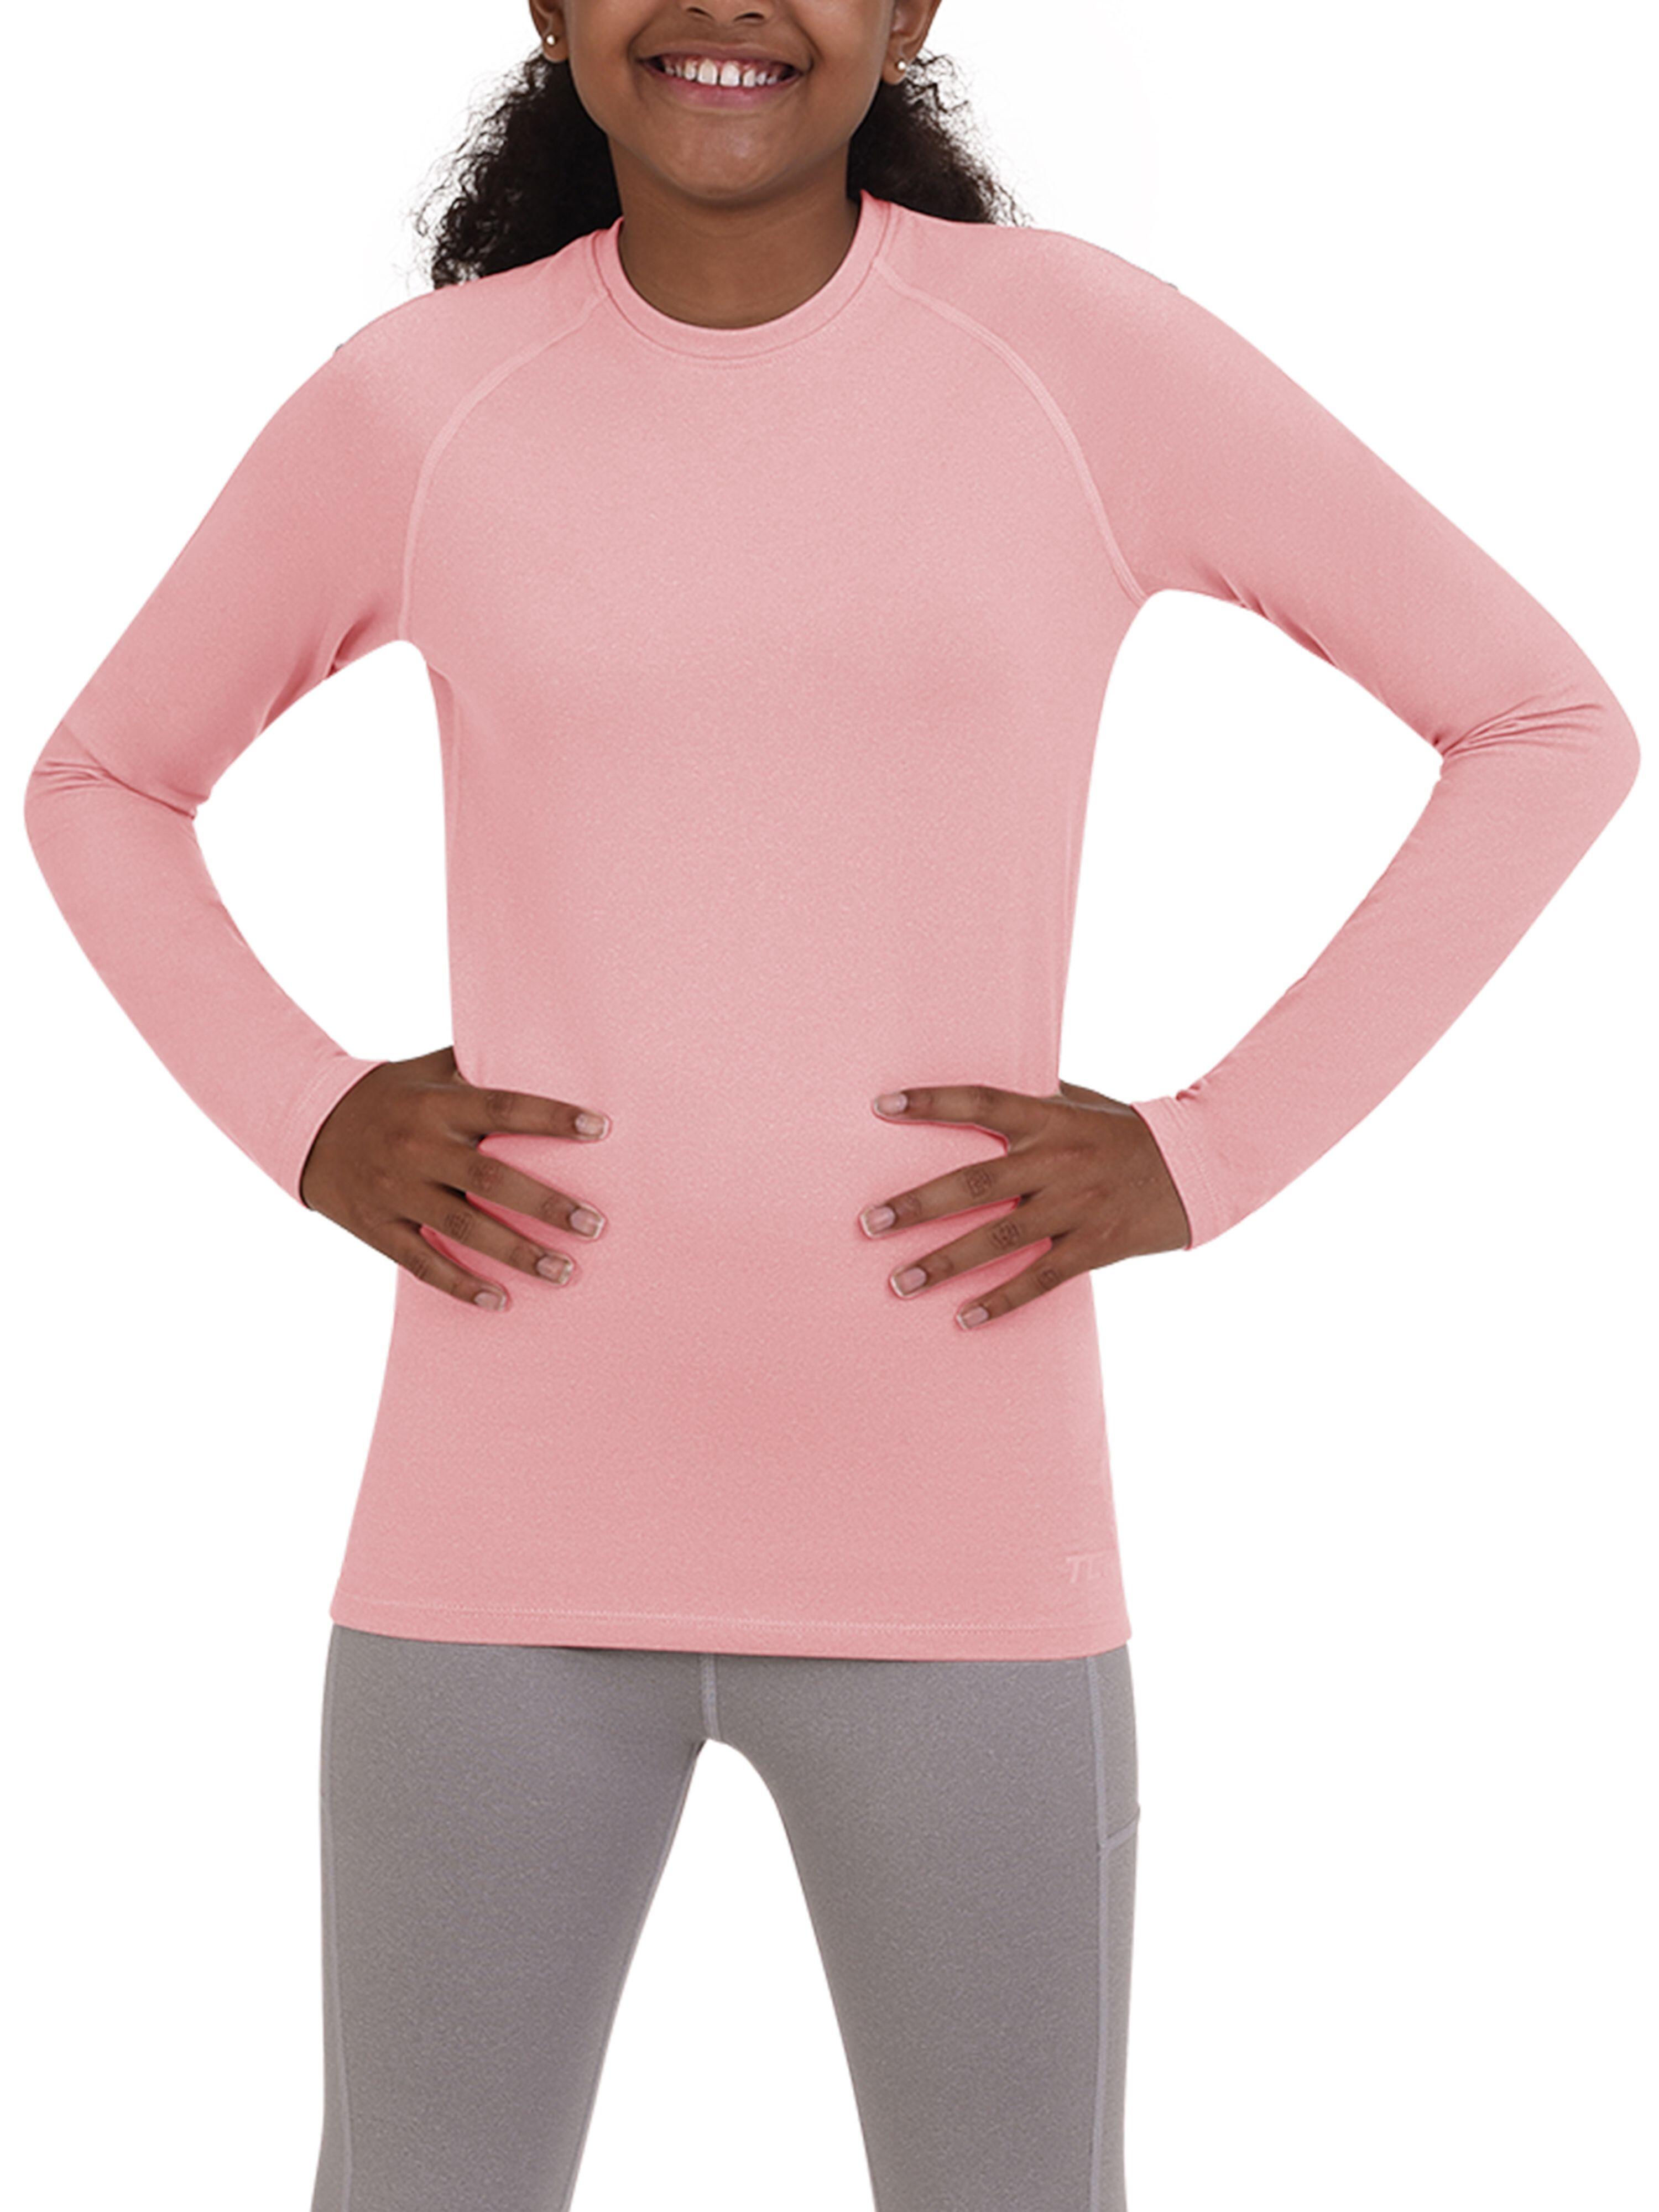 TCA Girls' Super Thermal Base Layer Top - Silver Pink Marl